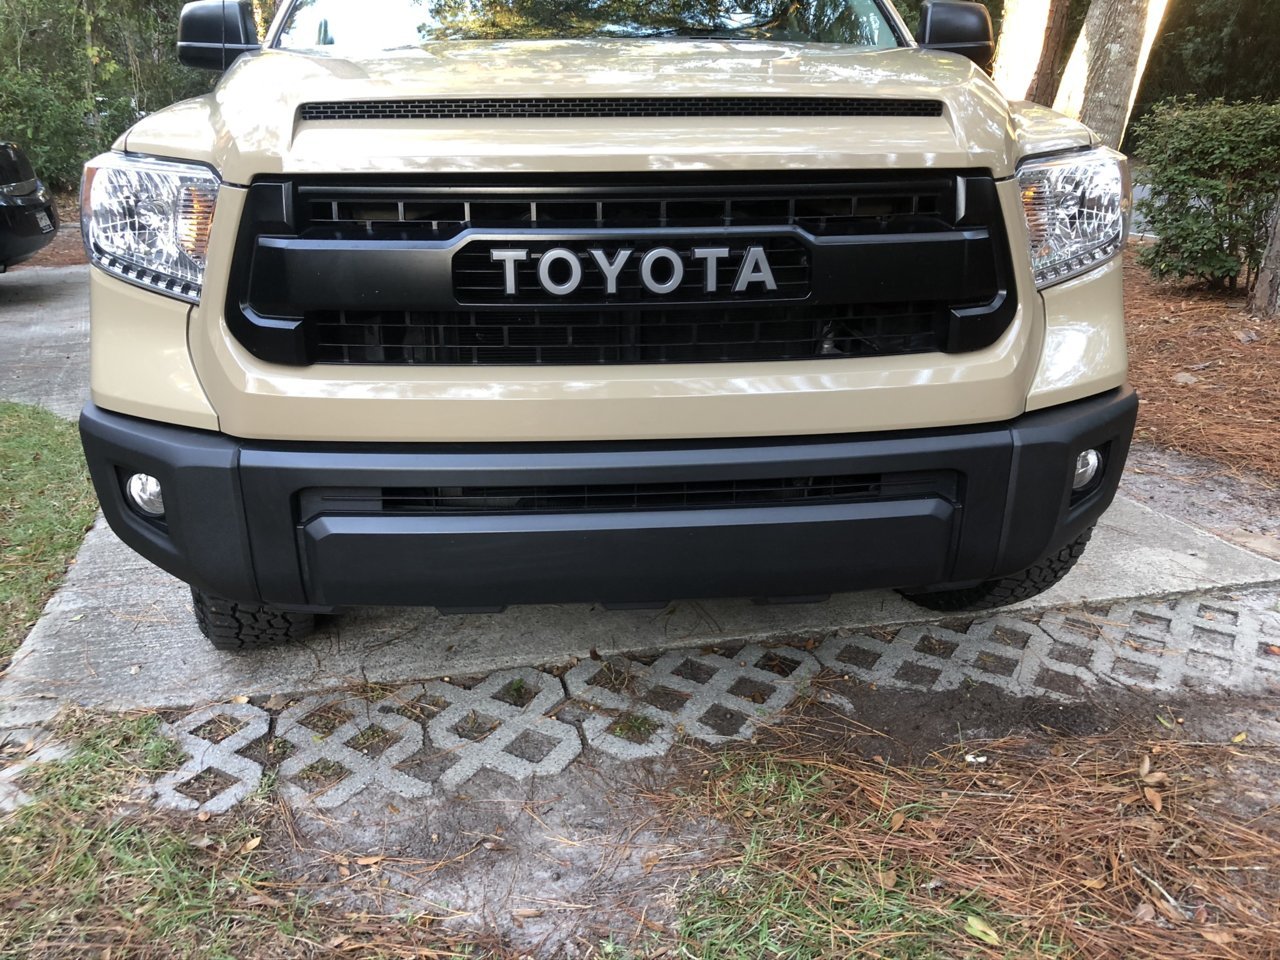 Chrome Delete Covers for Tundra Bumpers - BumperShellz | Page 95